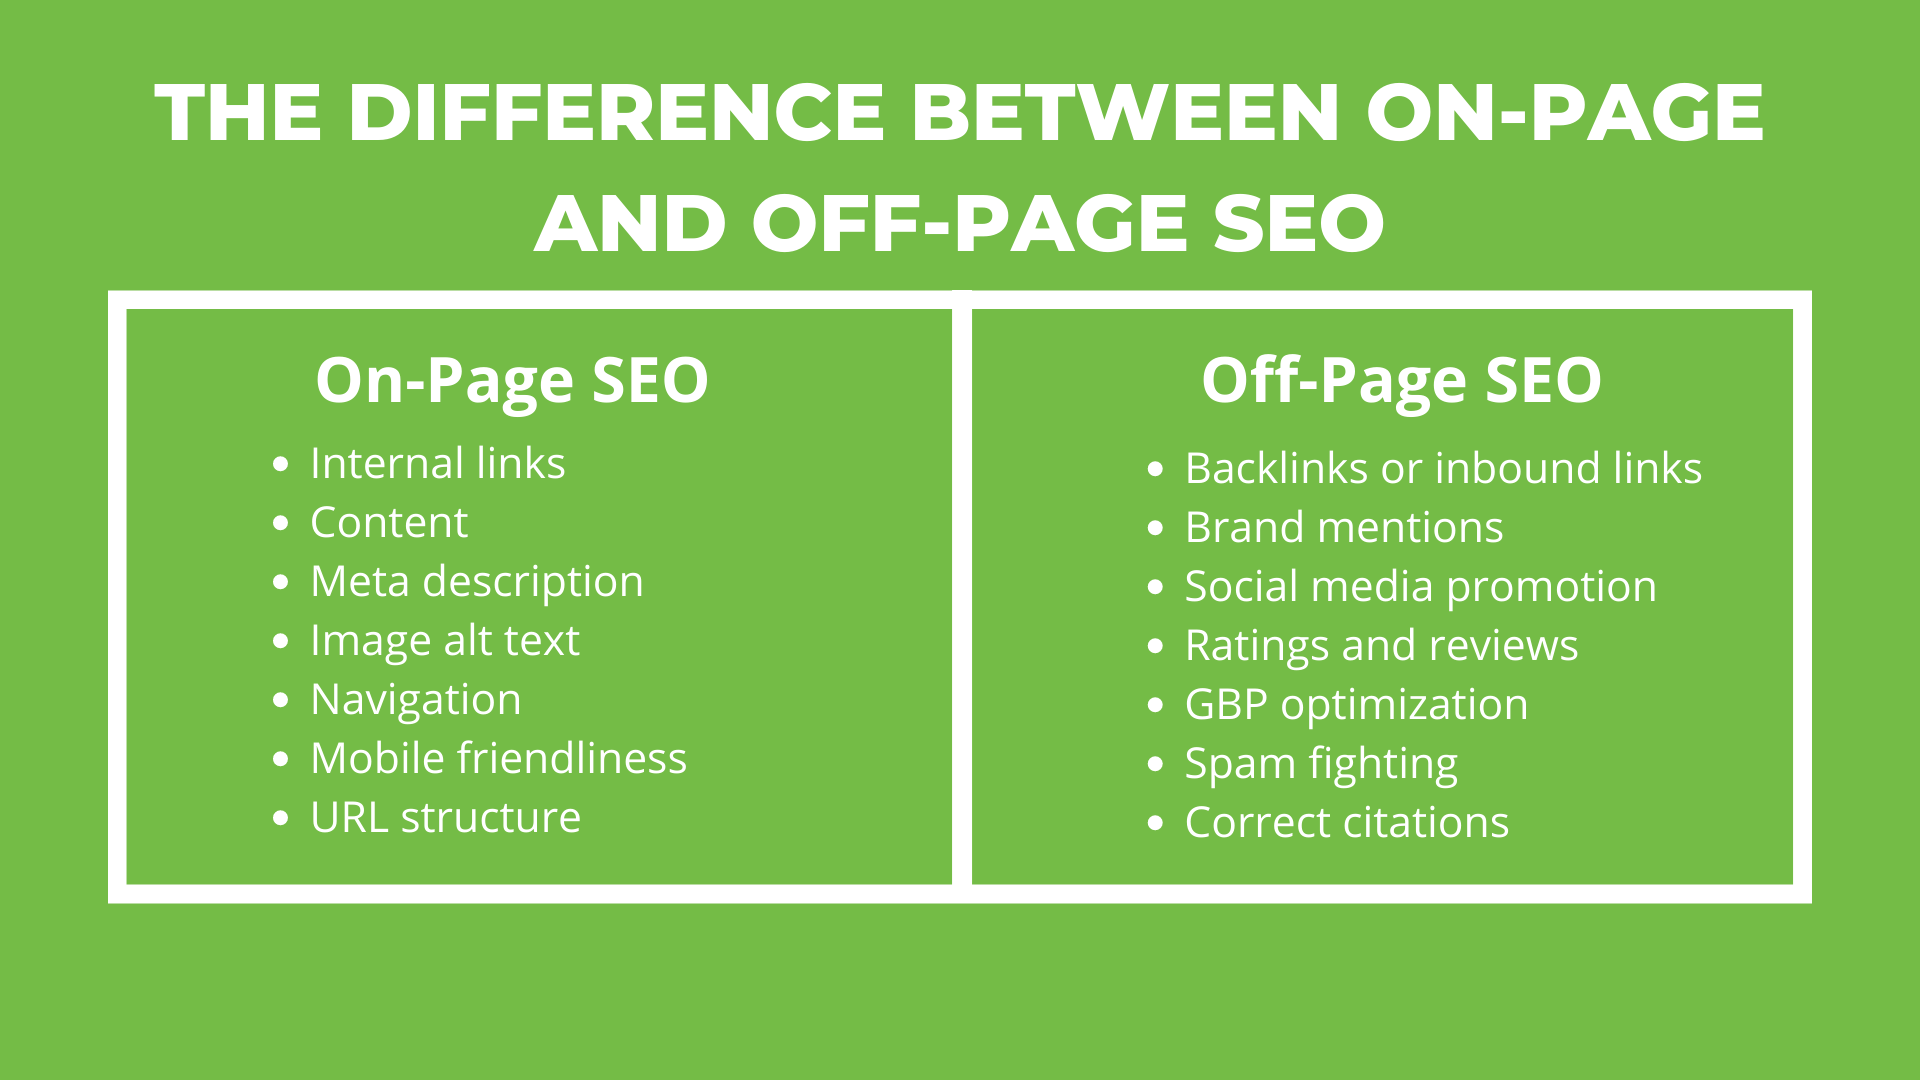 T-chart comparing on-page and off-page SEO. The text is in white with a light-green background